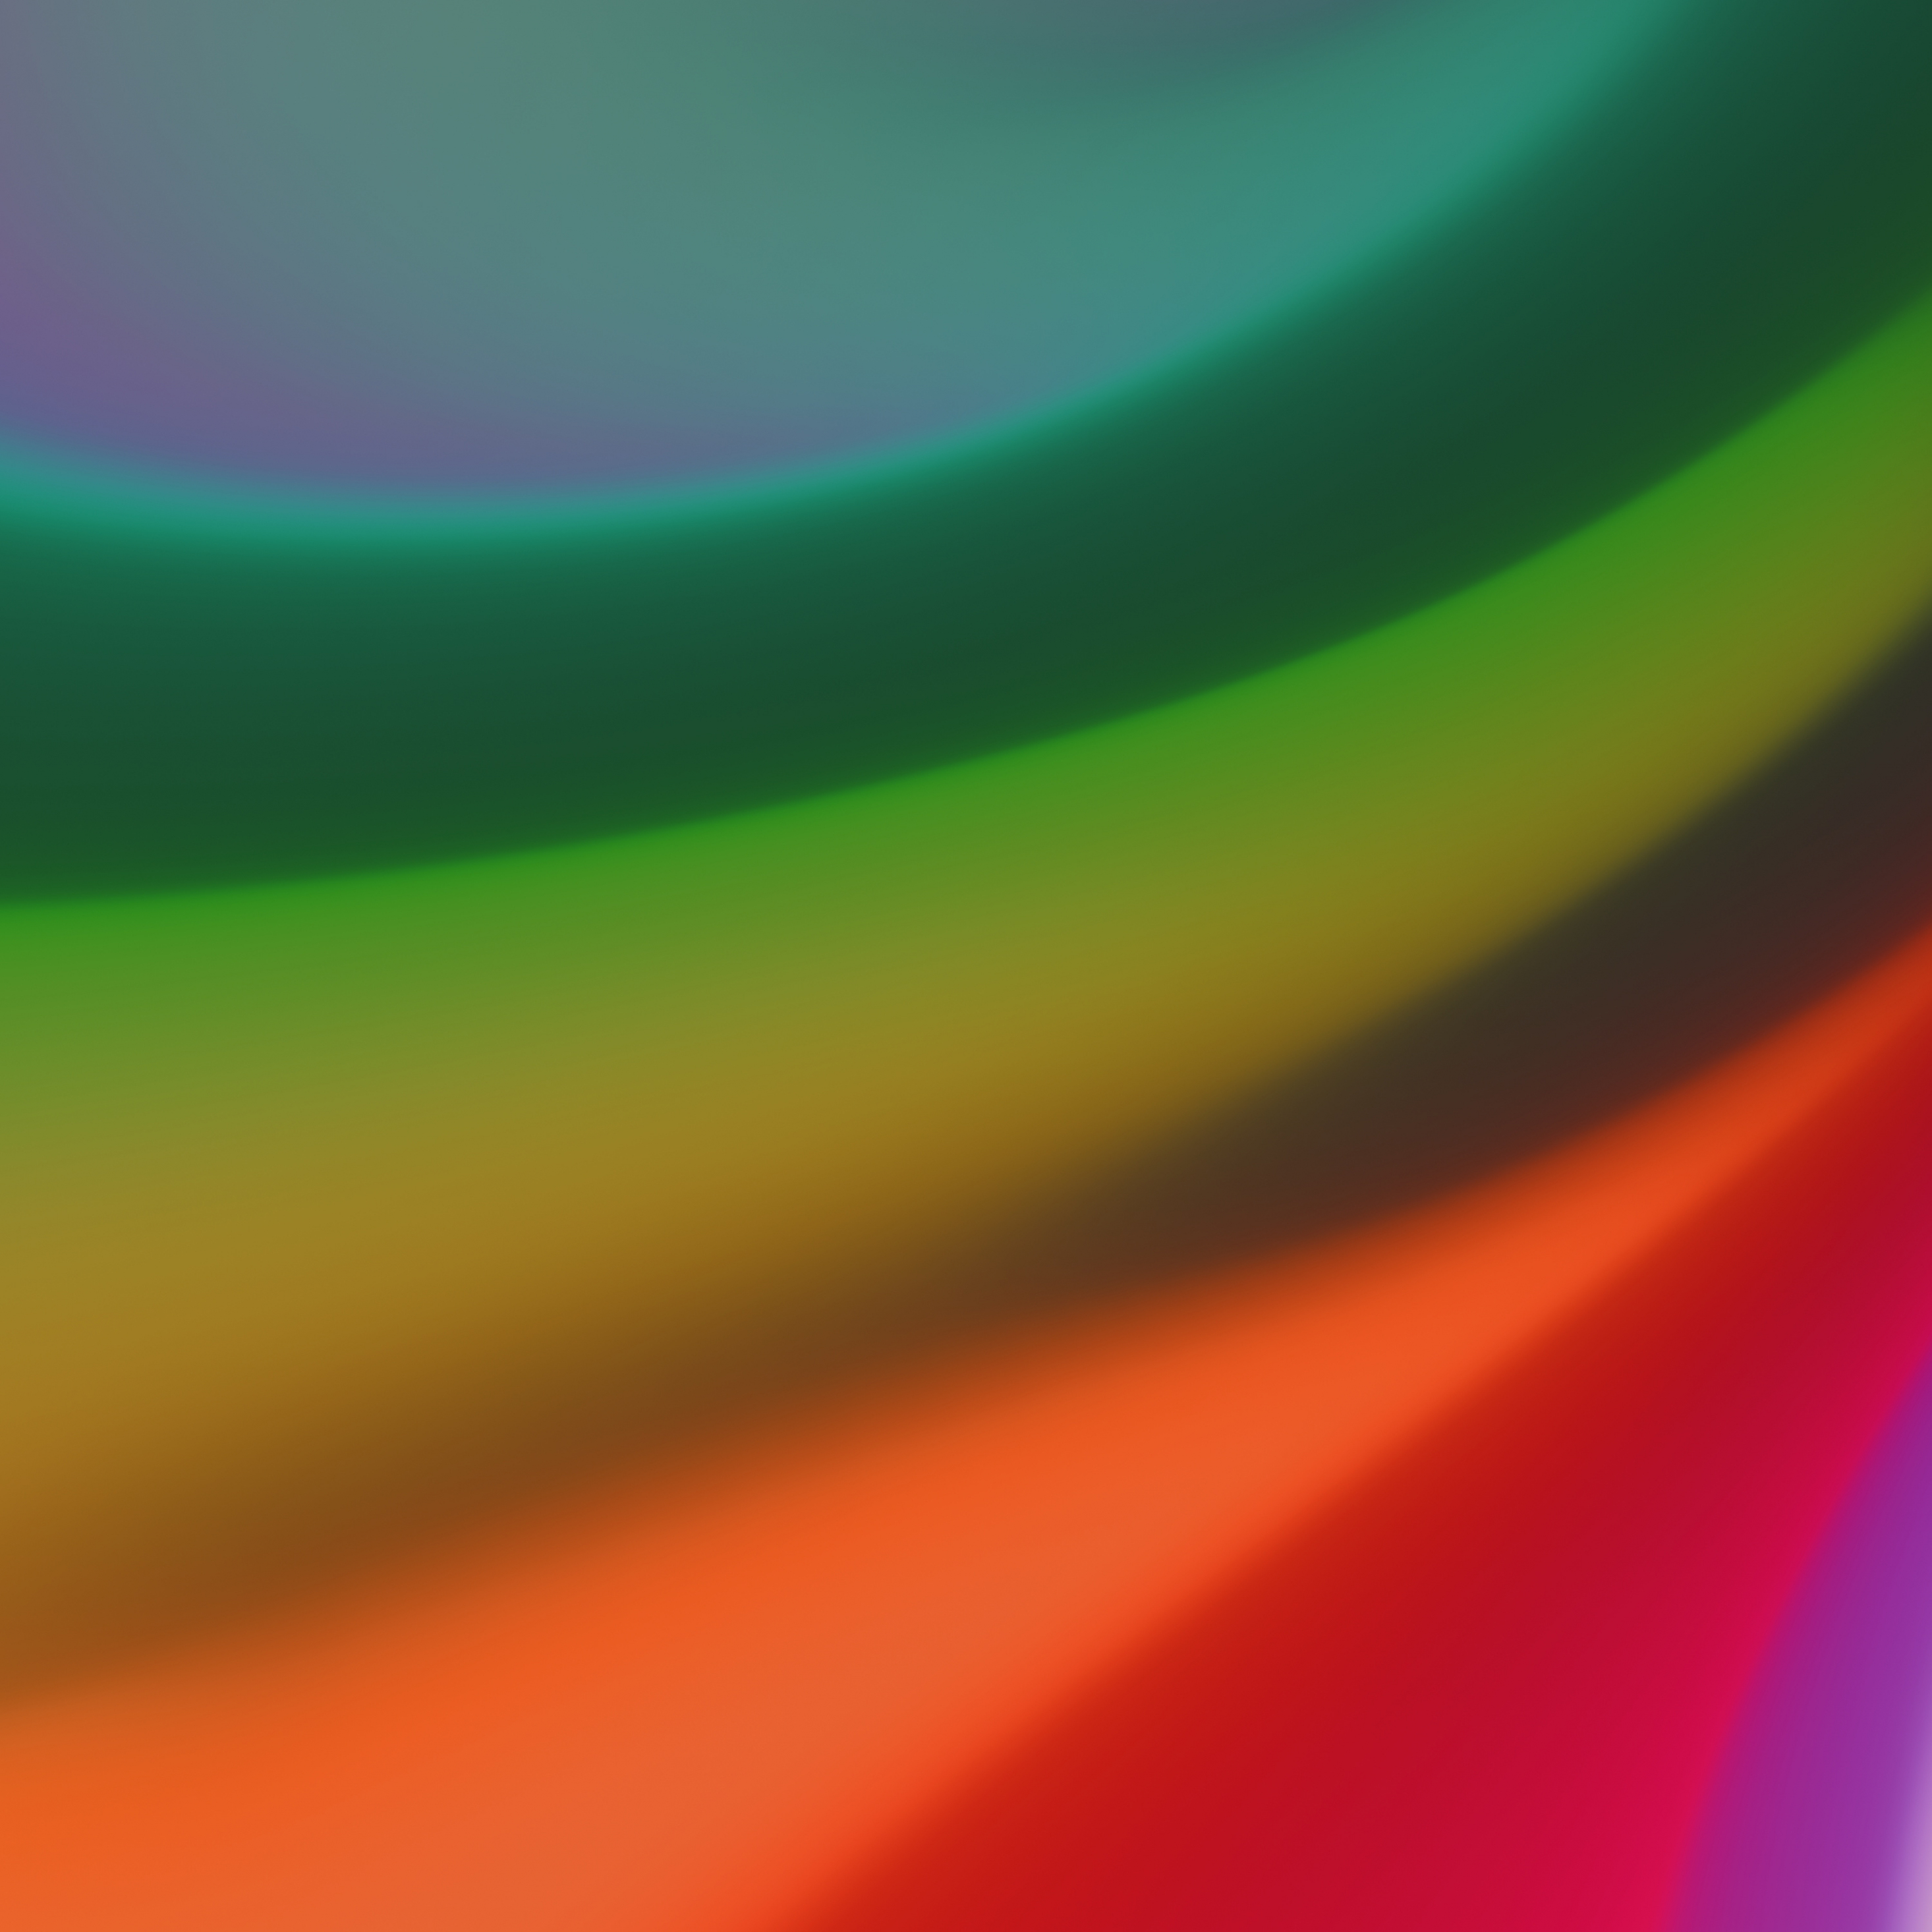 Download Wallpaper 2932x2932 Abstract Gradients Colorful Creamy